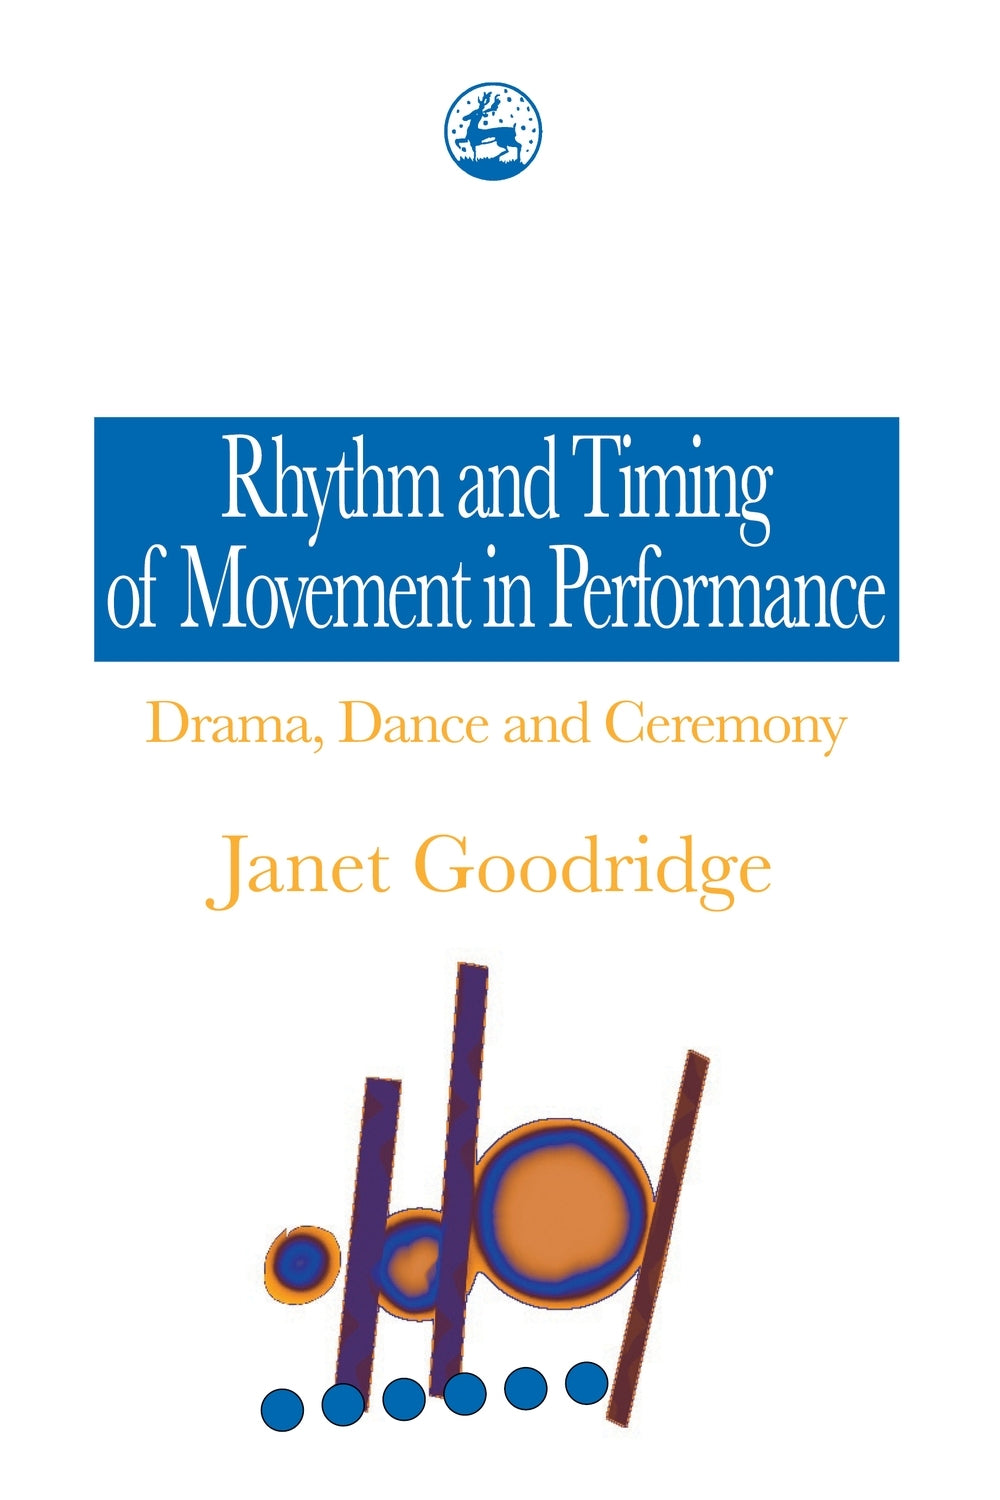 Rhythm and Timing of Movement in Performance by Janet Goodridge